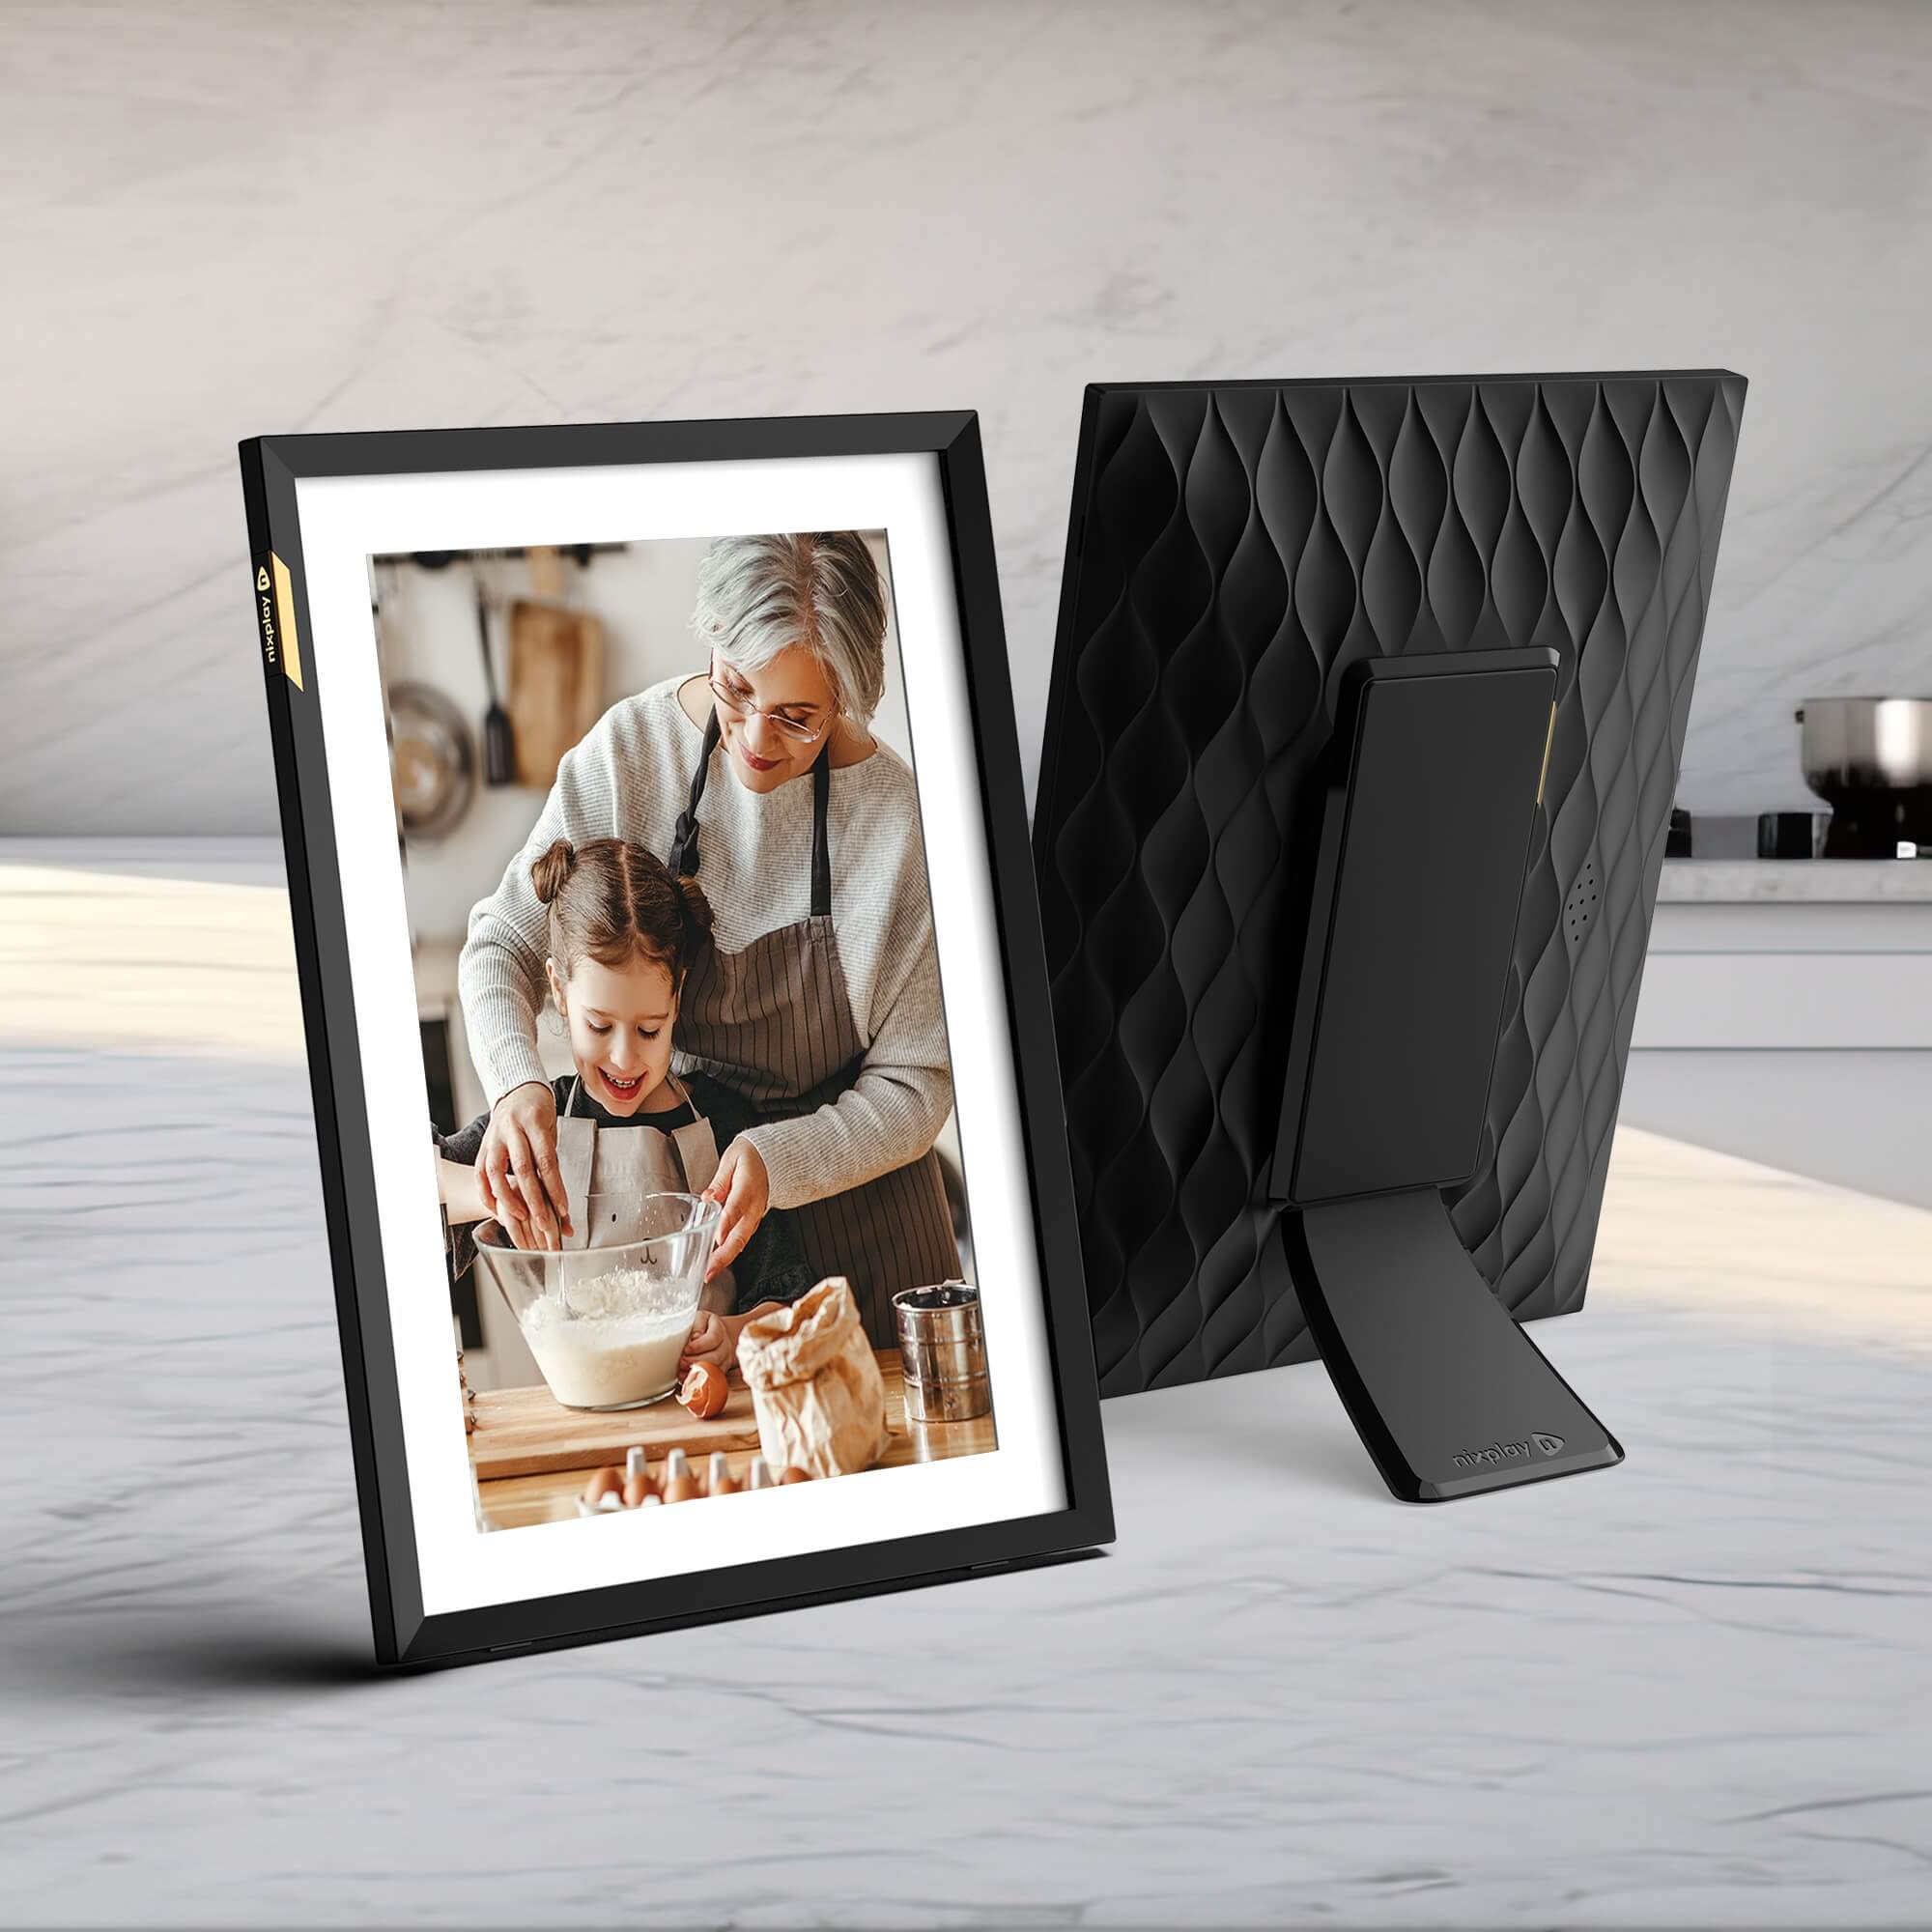 Nixplay Smart Photo Frame, 10.1 Inch Touch